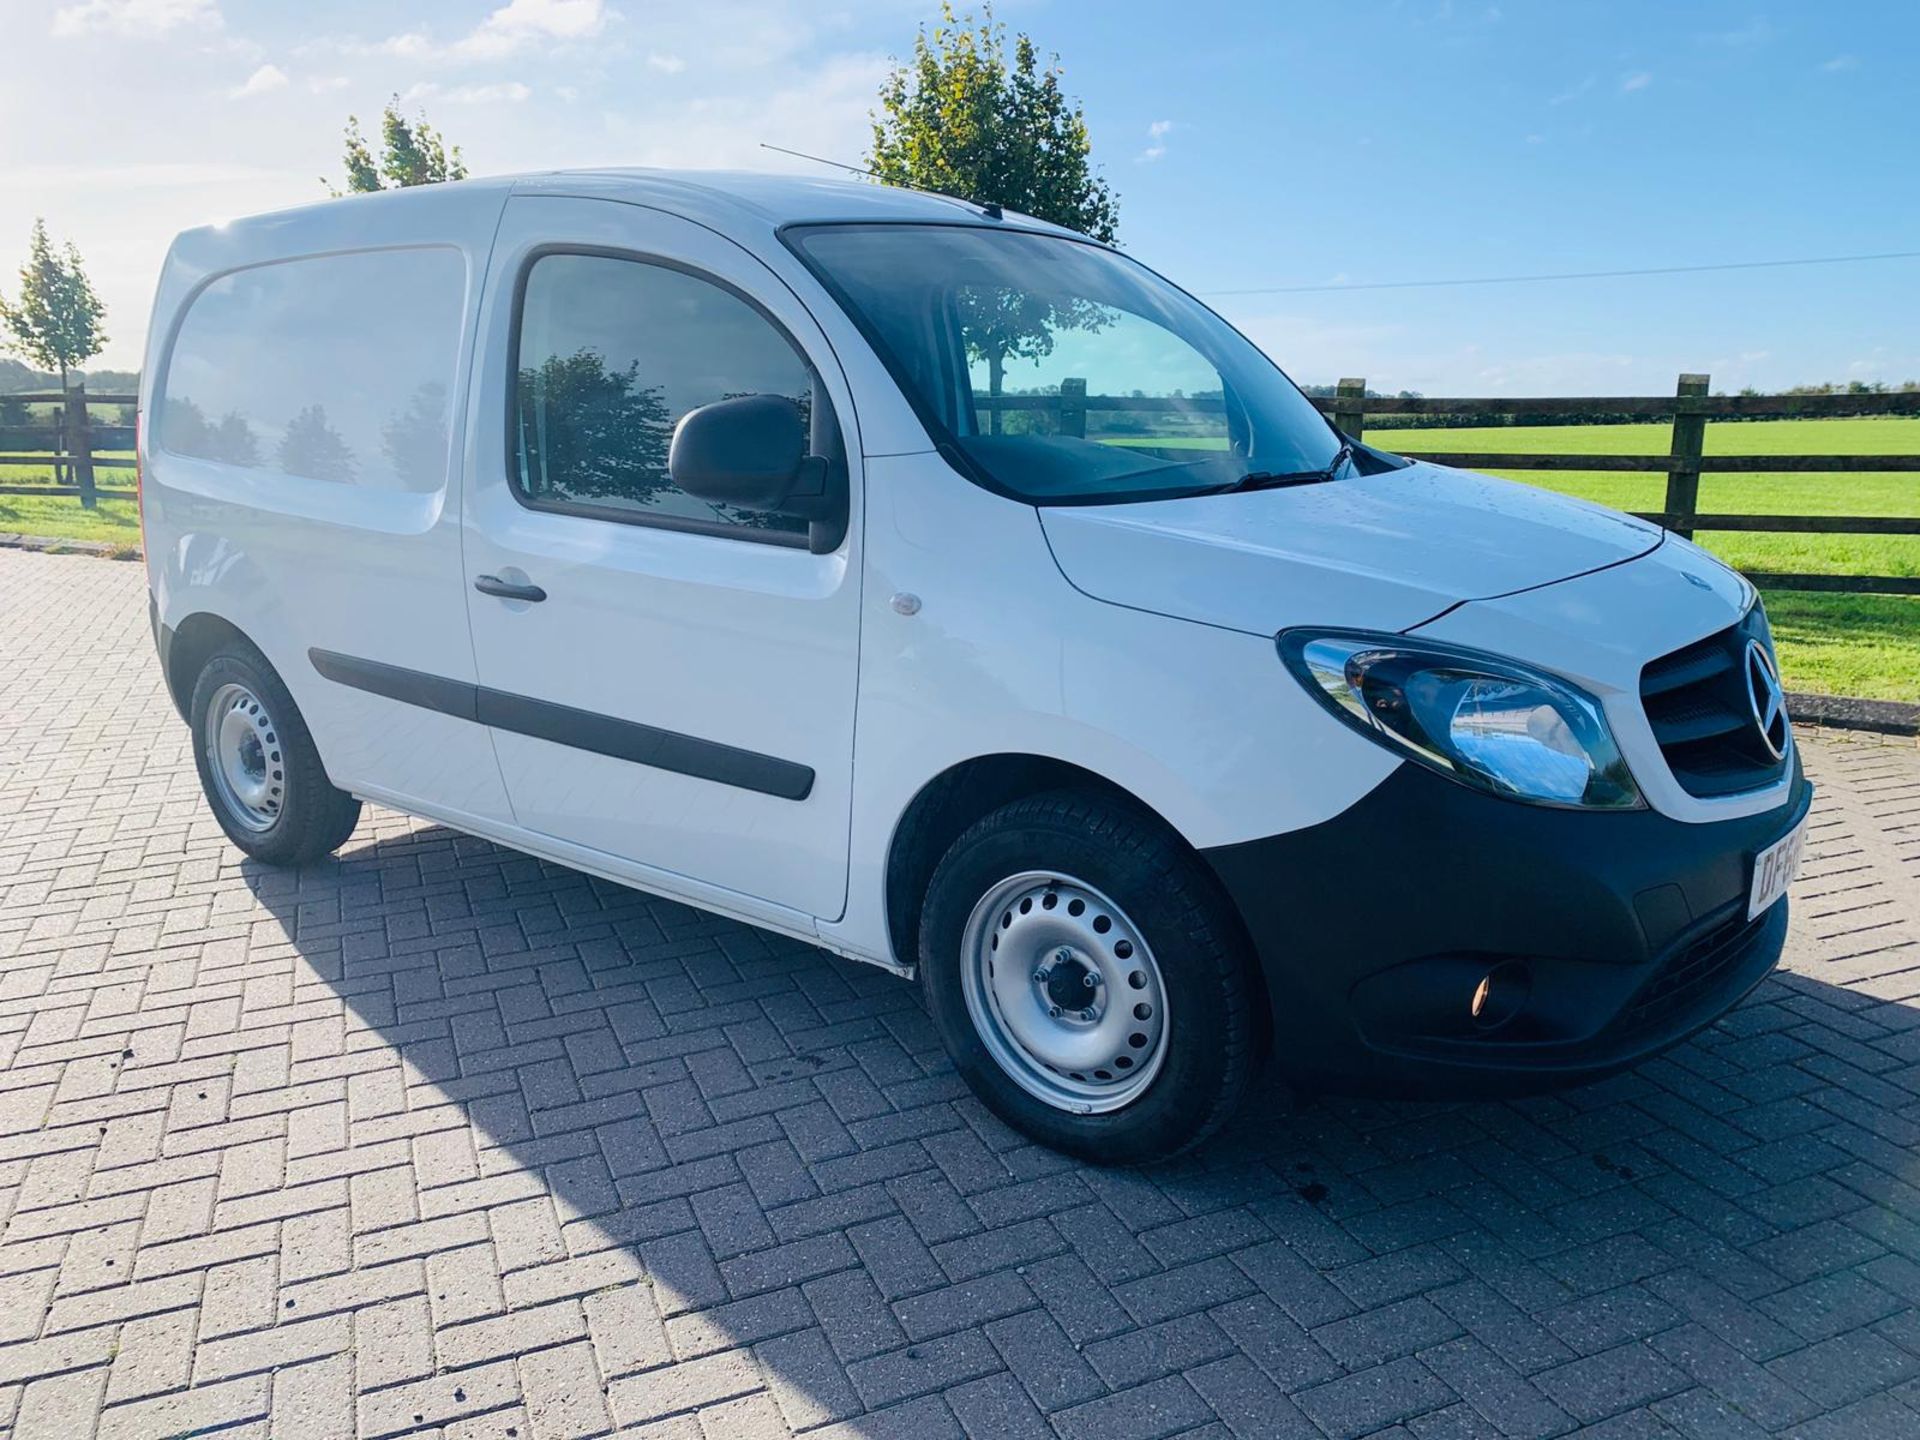 (RESERVE MET) Mercedes Citan 1.5 109 CDI LWB - 2019 Model - 1 Owner From New - ONLY 1K MILES WOW - Image 2 of 20